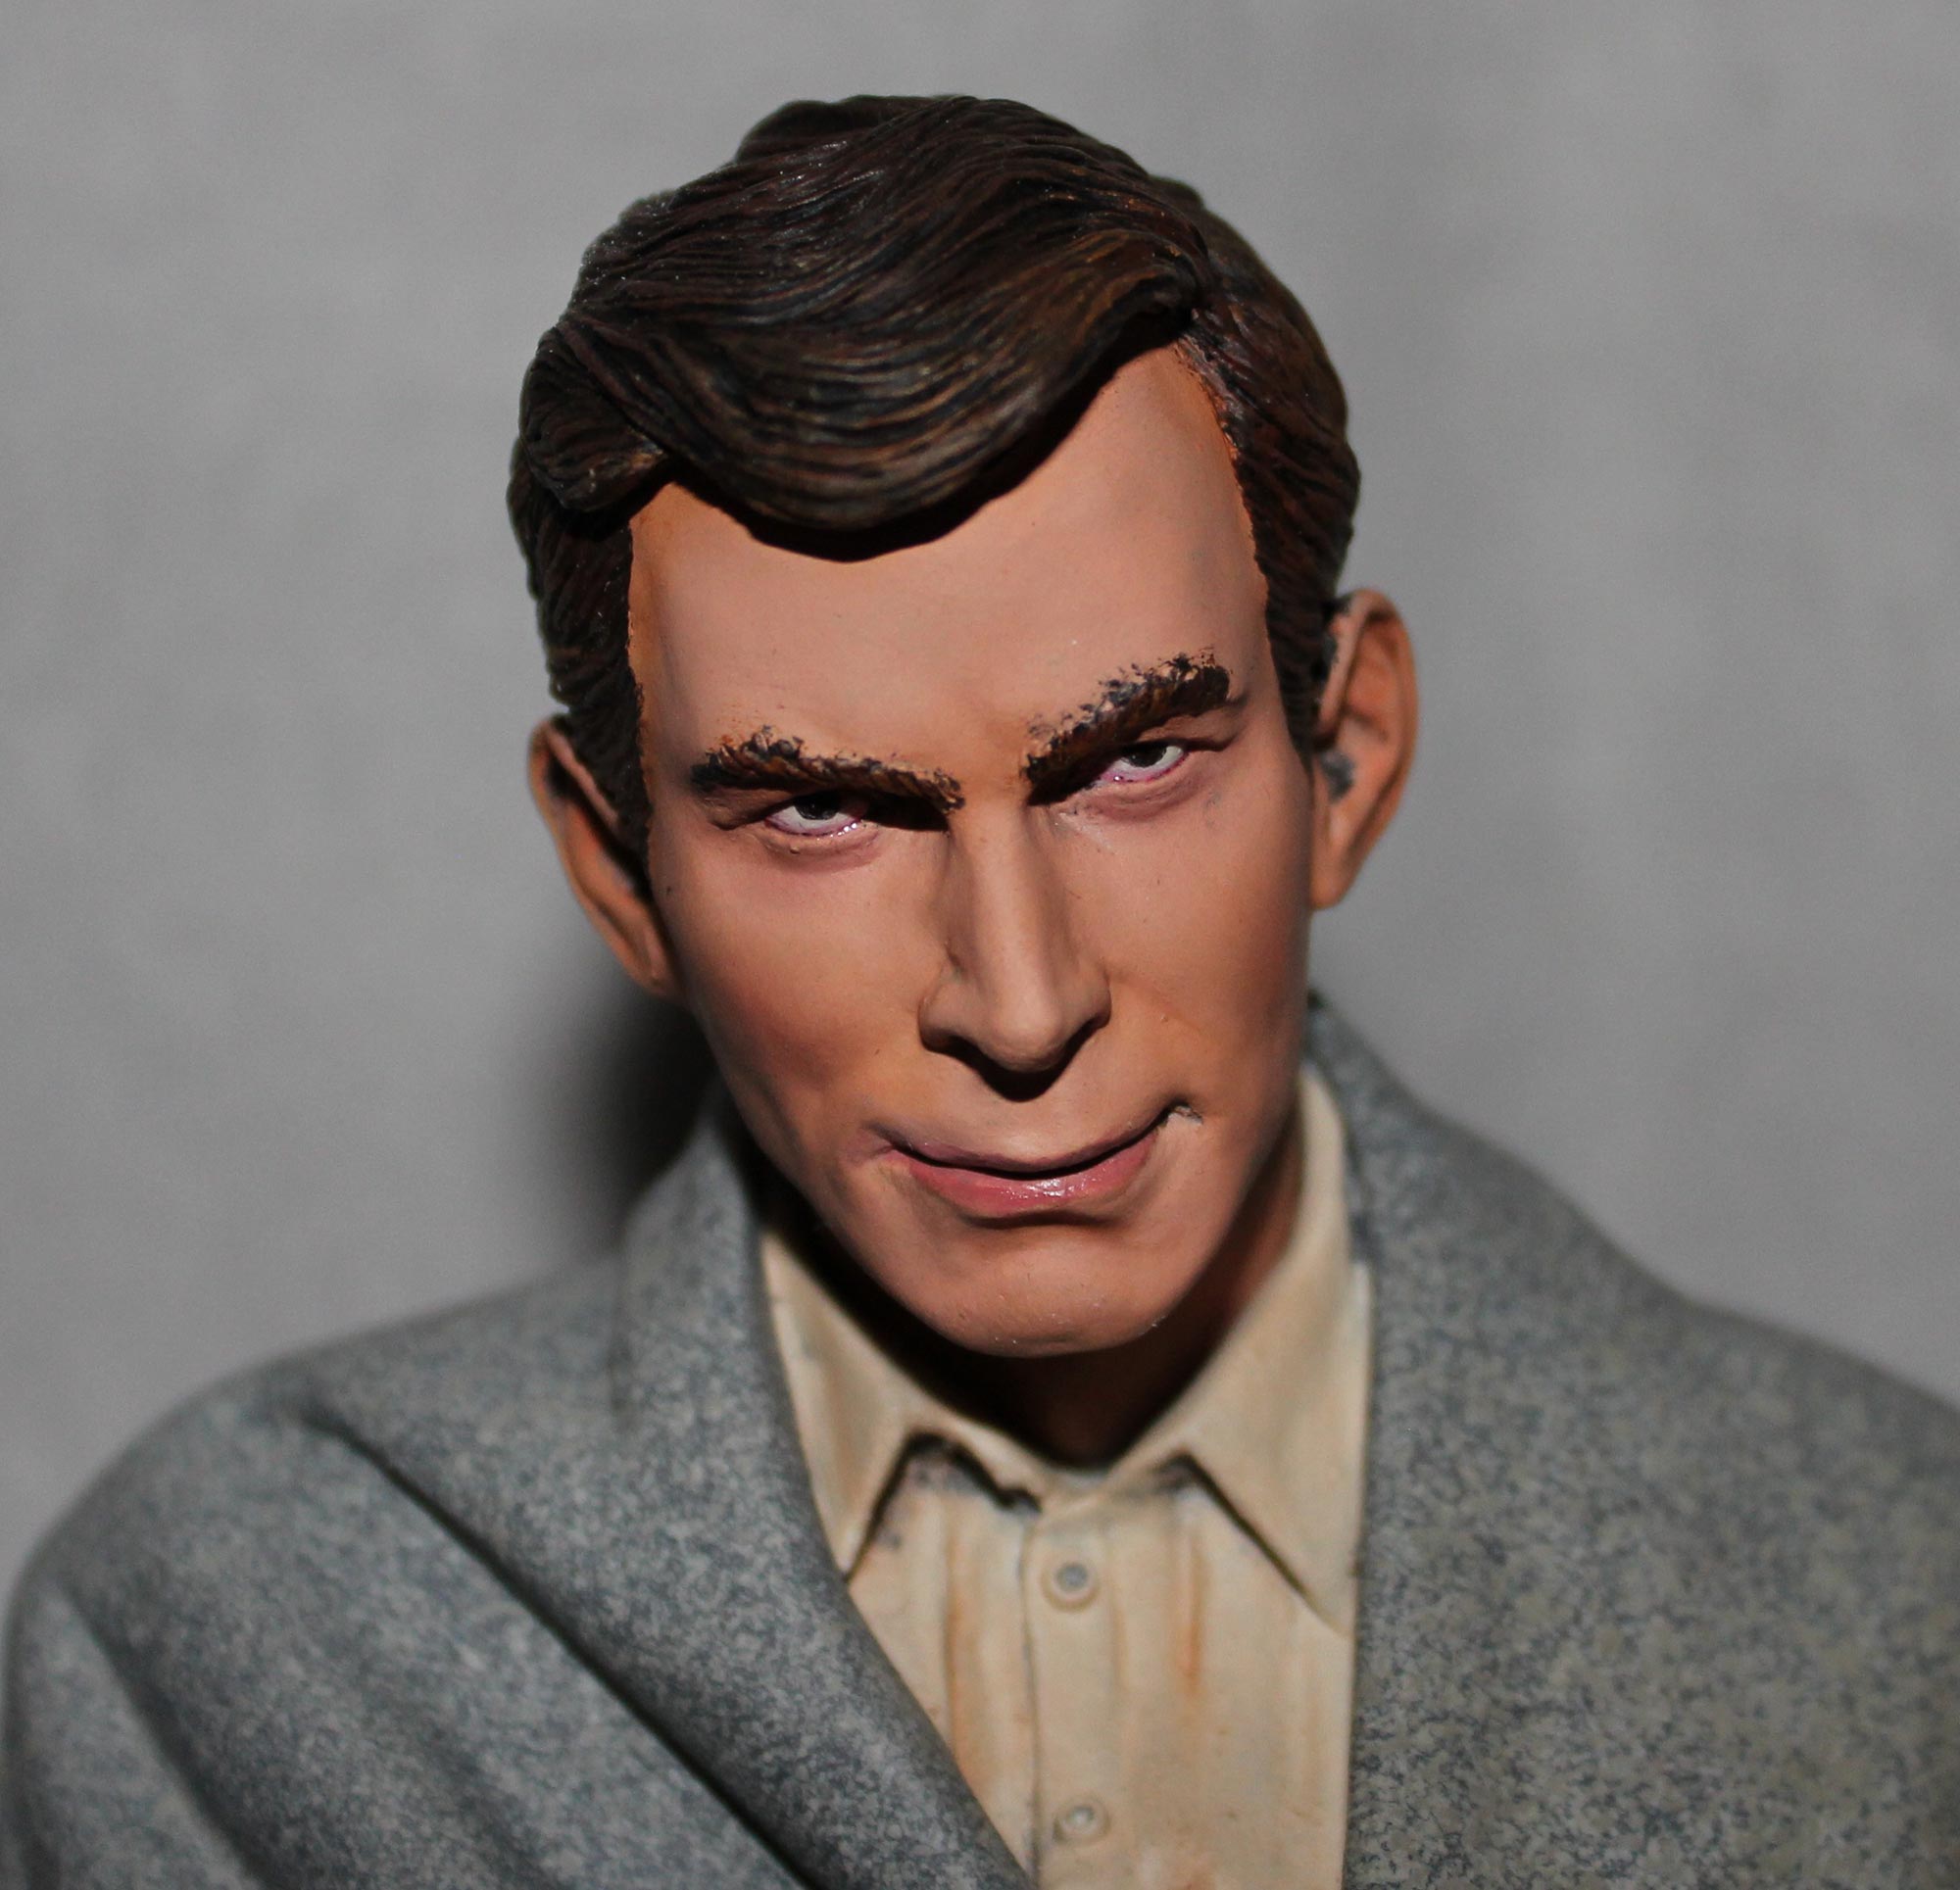 Norman Bates – The Doctor's Model Mansion